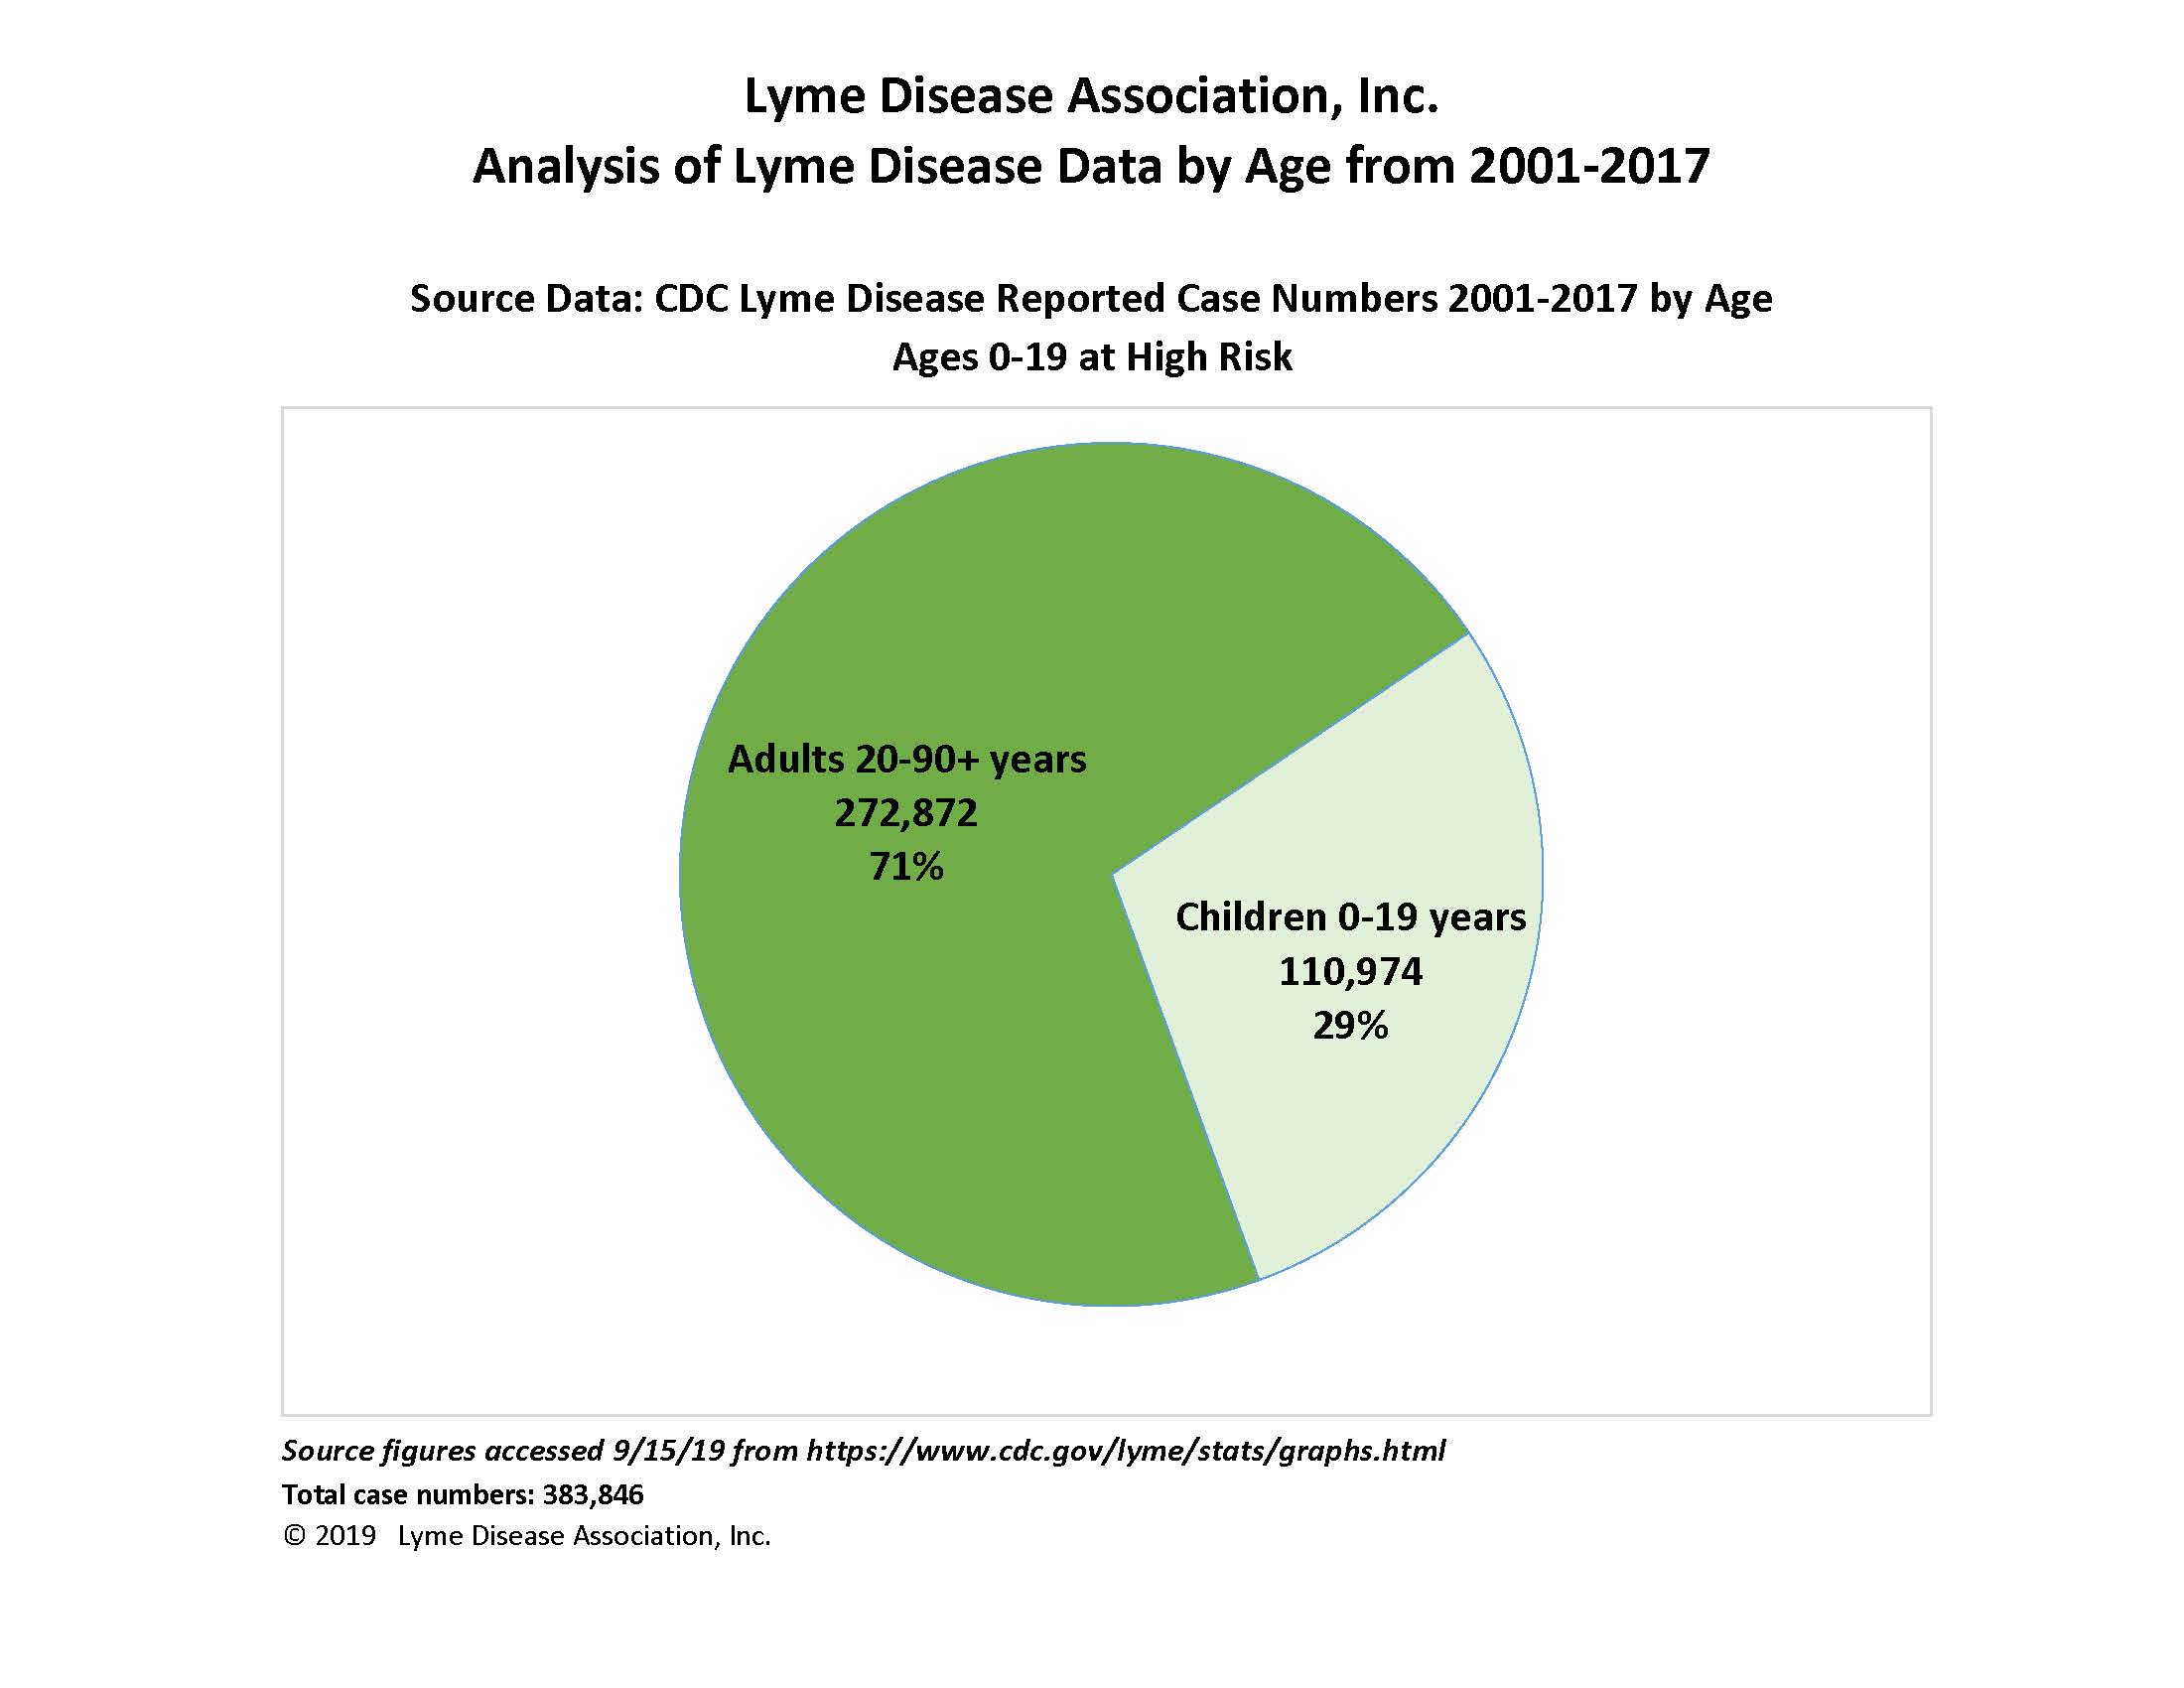 LDA Analysis of Lyme Disease Data by Age from 2001-2017